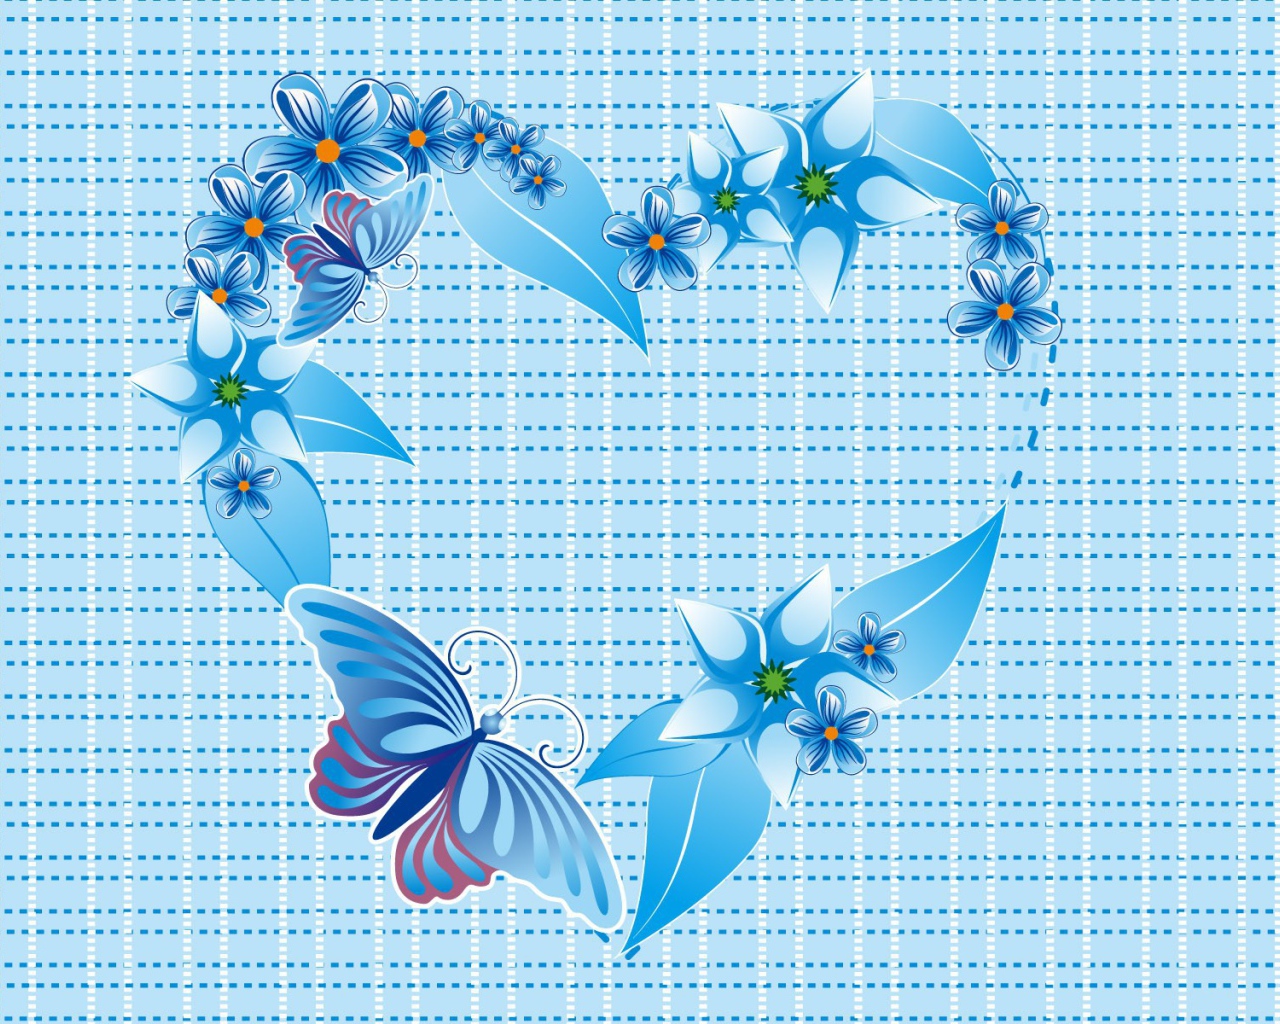 The blue heart of butterflies and flowers